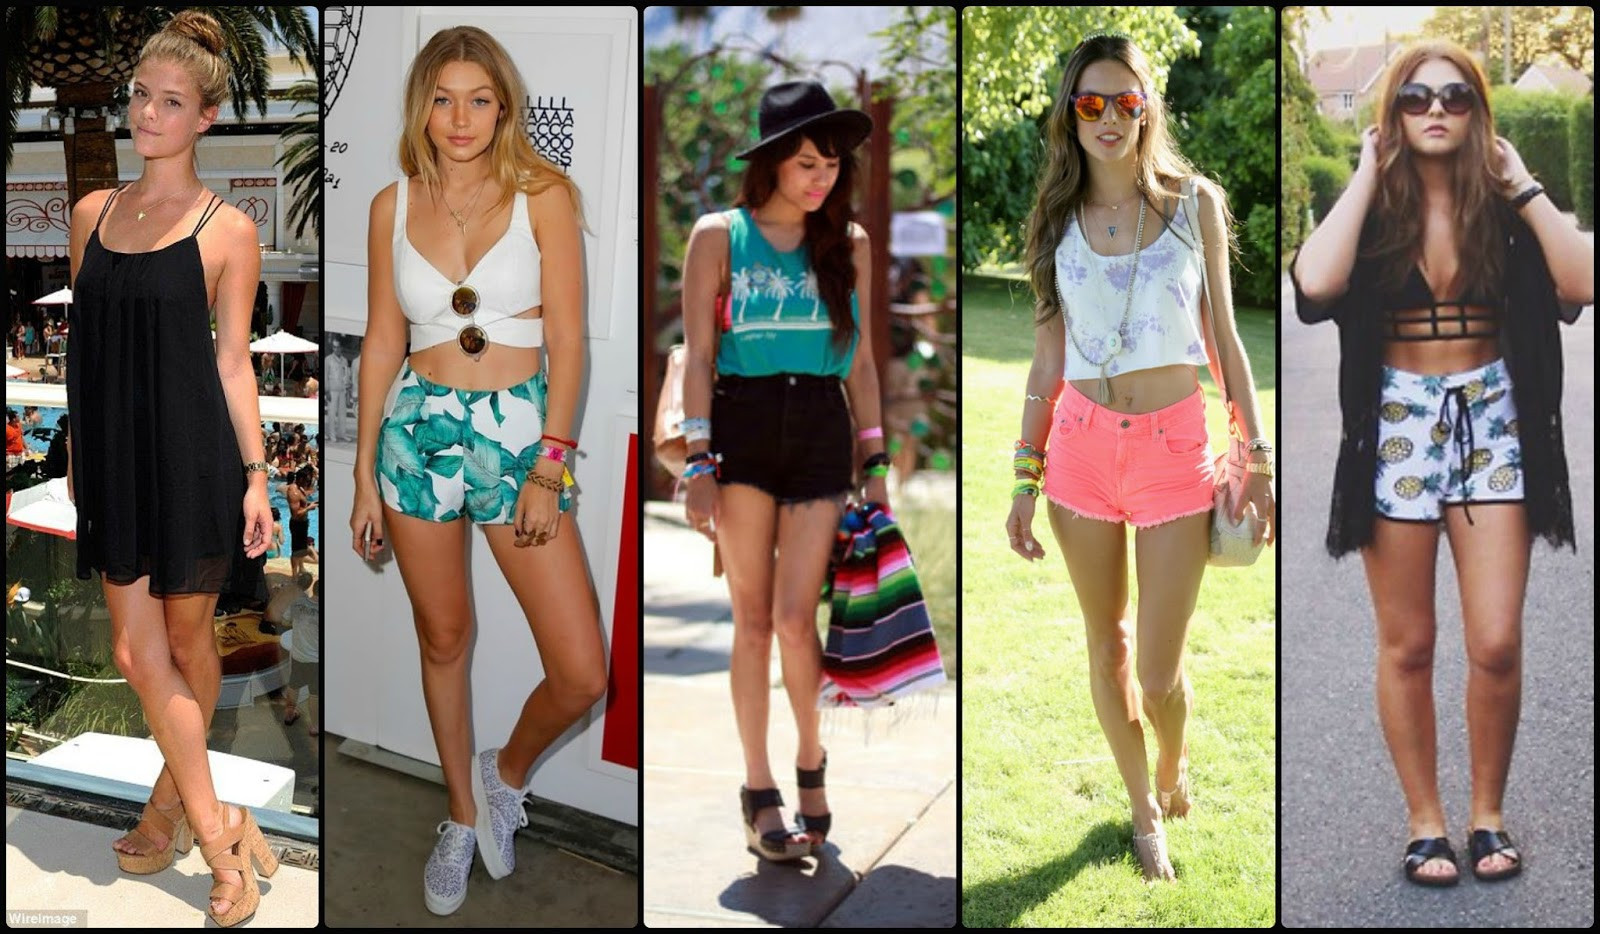 Pool Party Dress Up Ideas
 LookBook Summer Pool party outfits